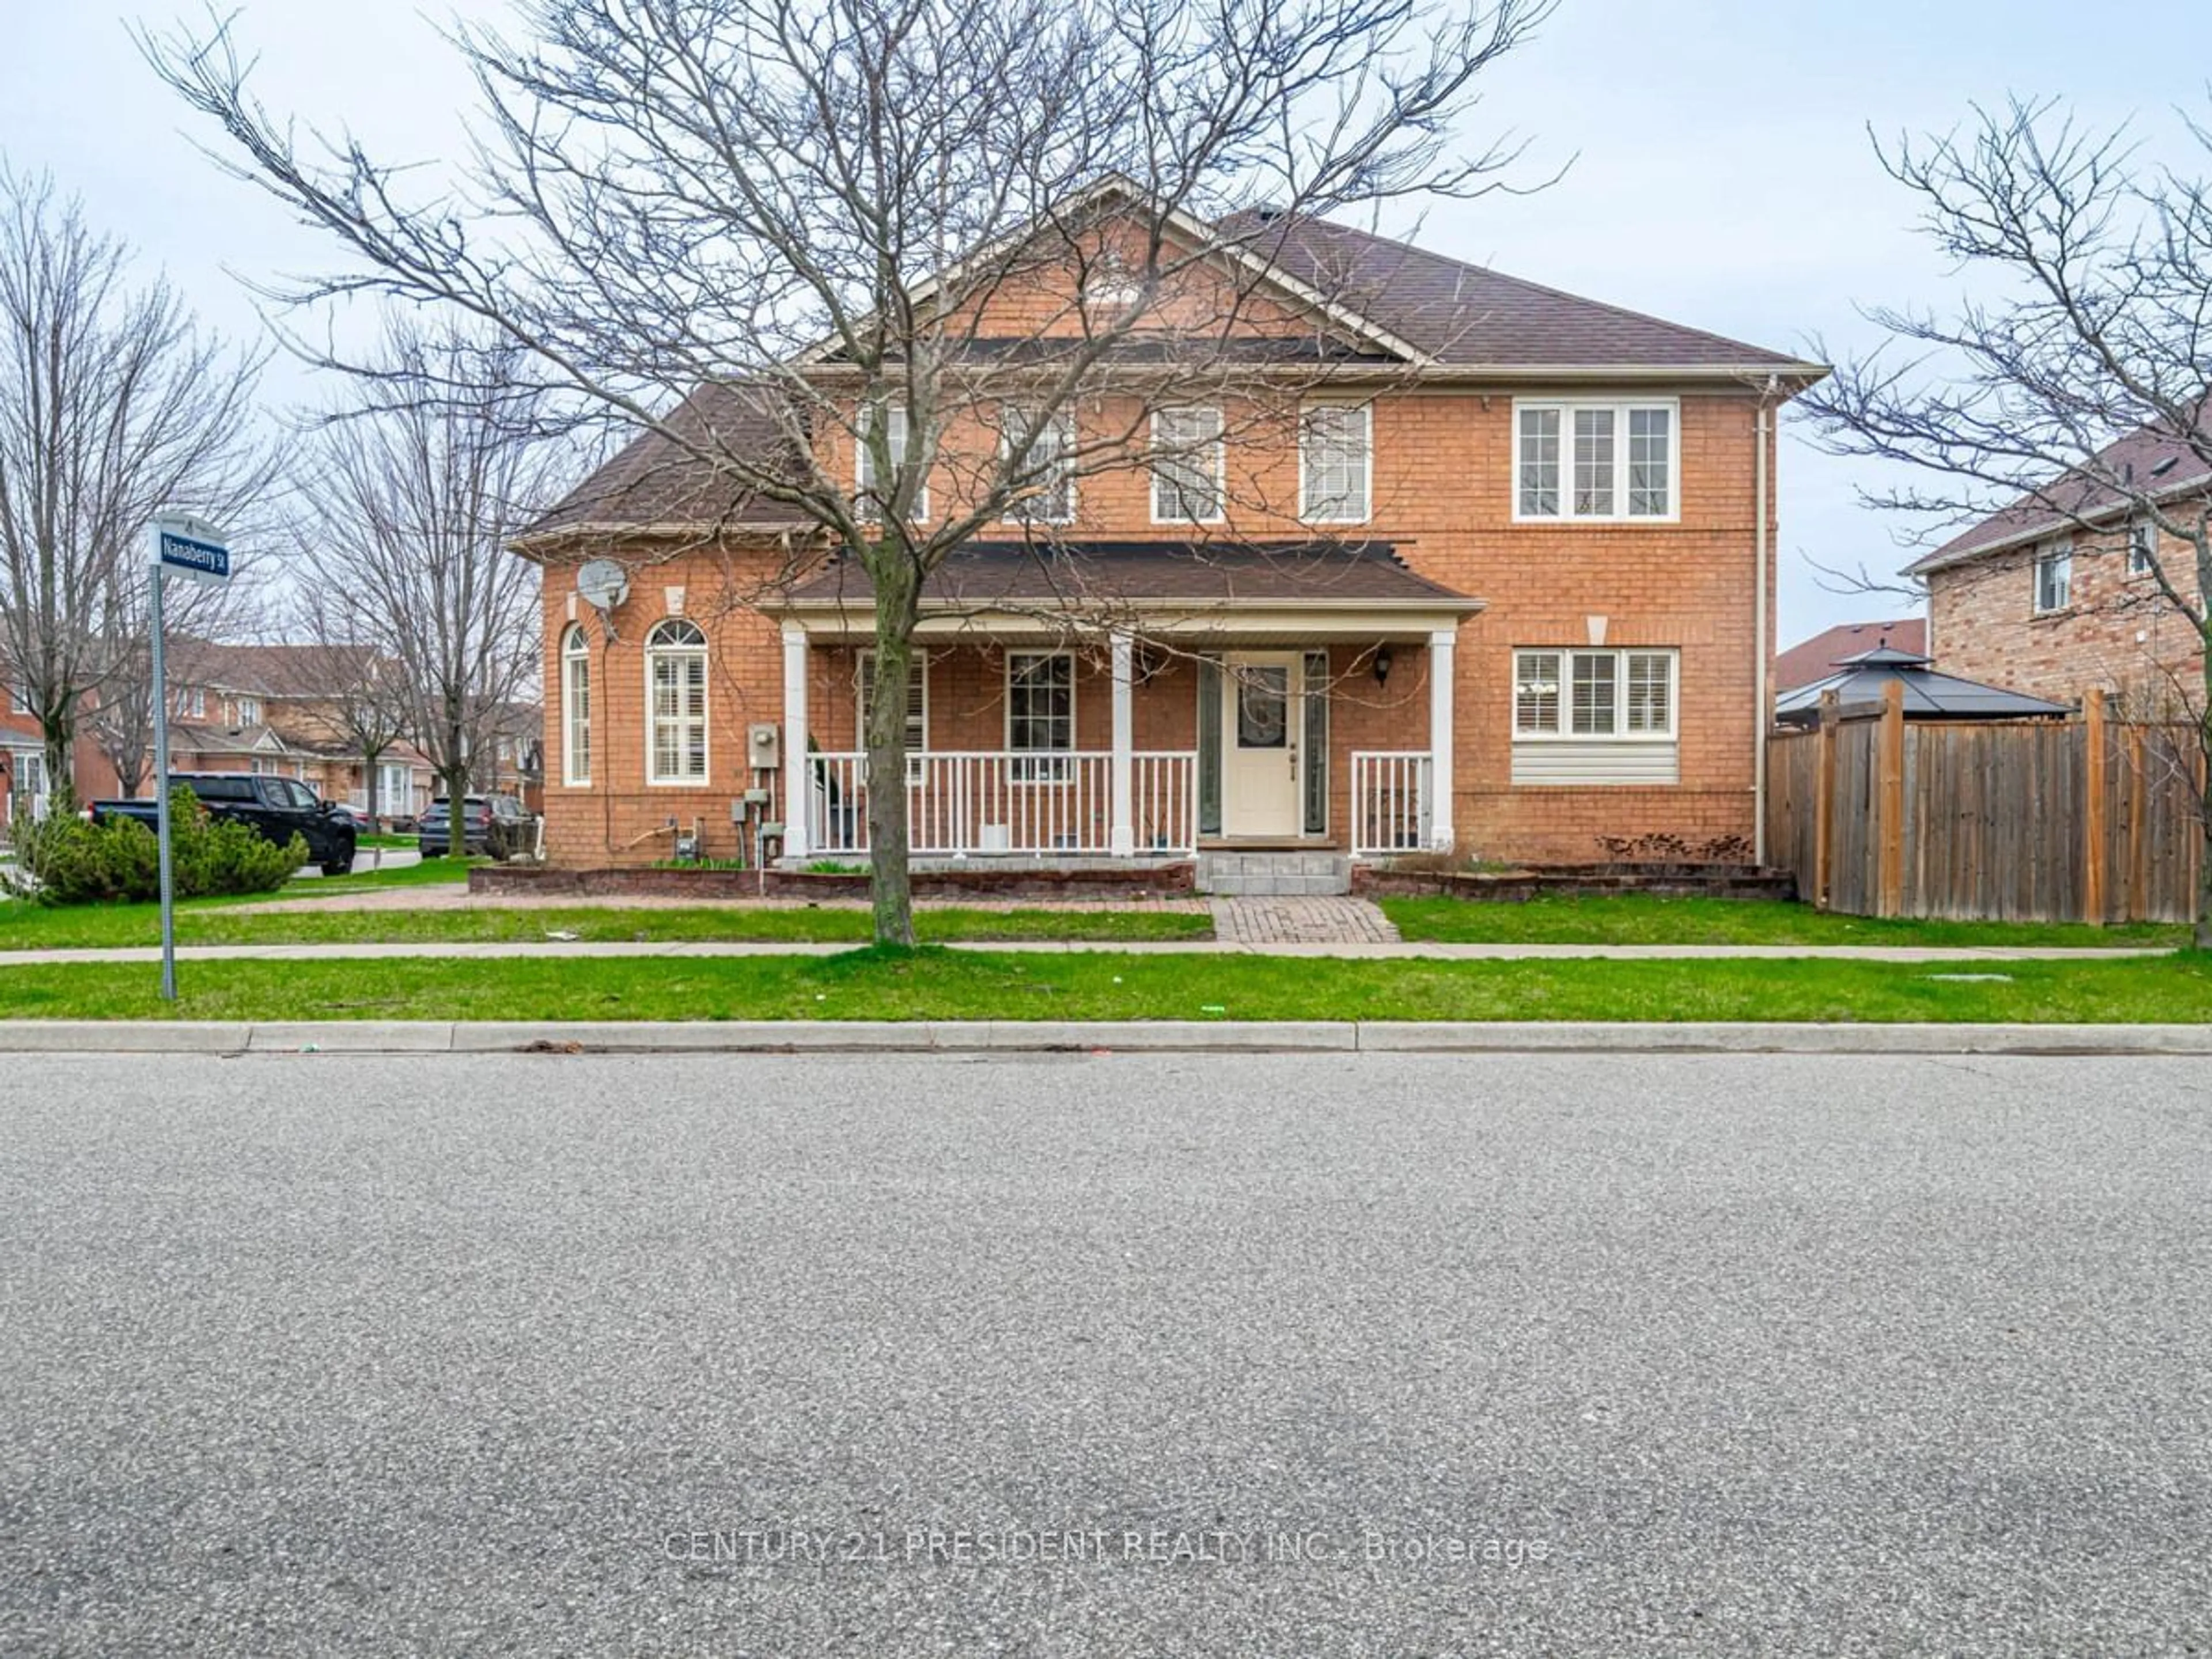 Home with brick exterior material for 49 Wharnsby Dr, Toronto Ontario M1X 1Y5